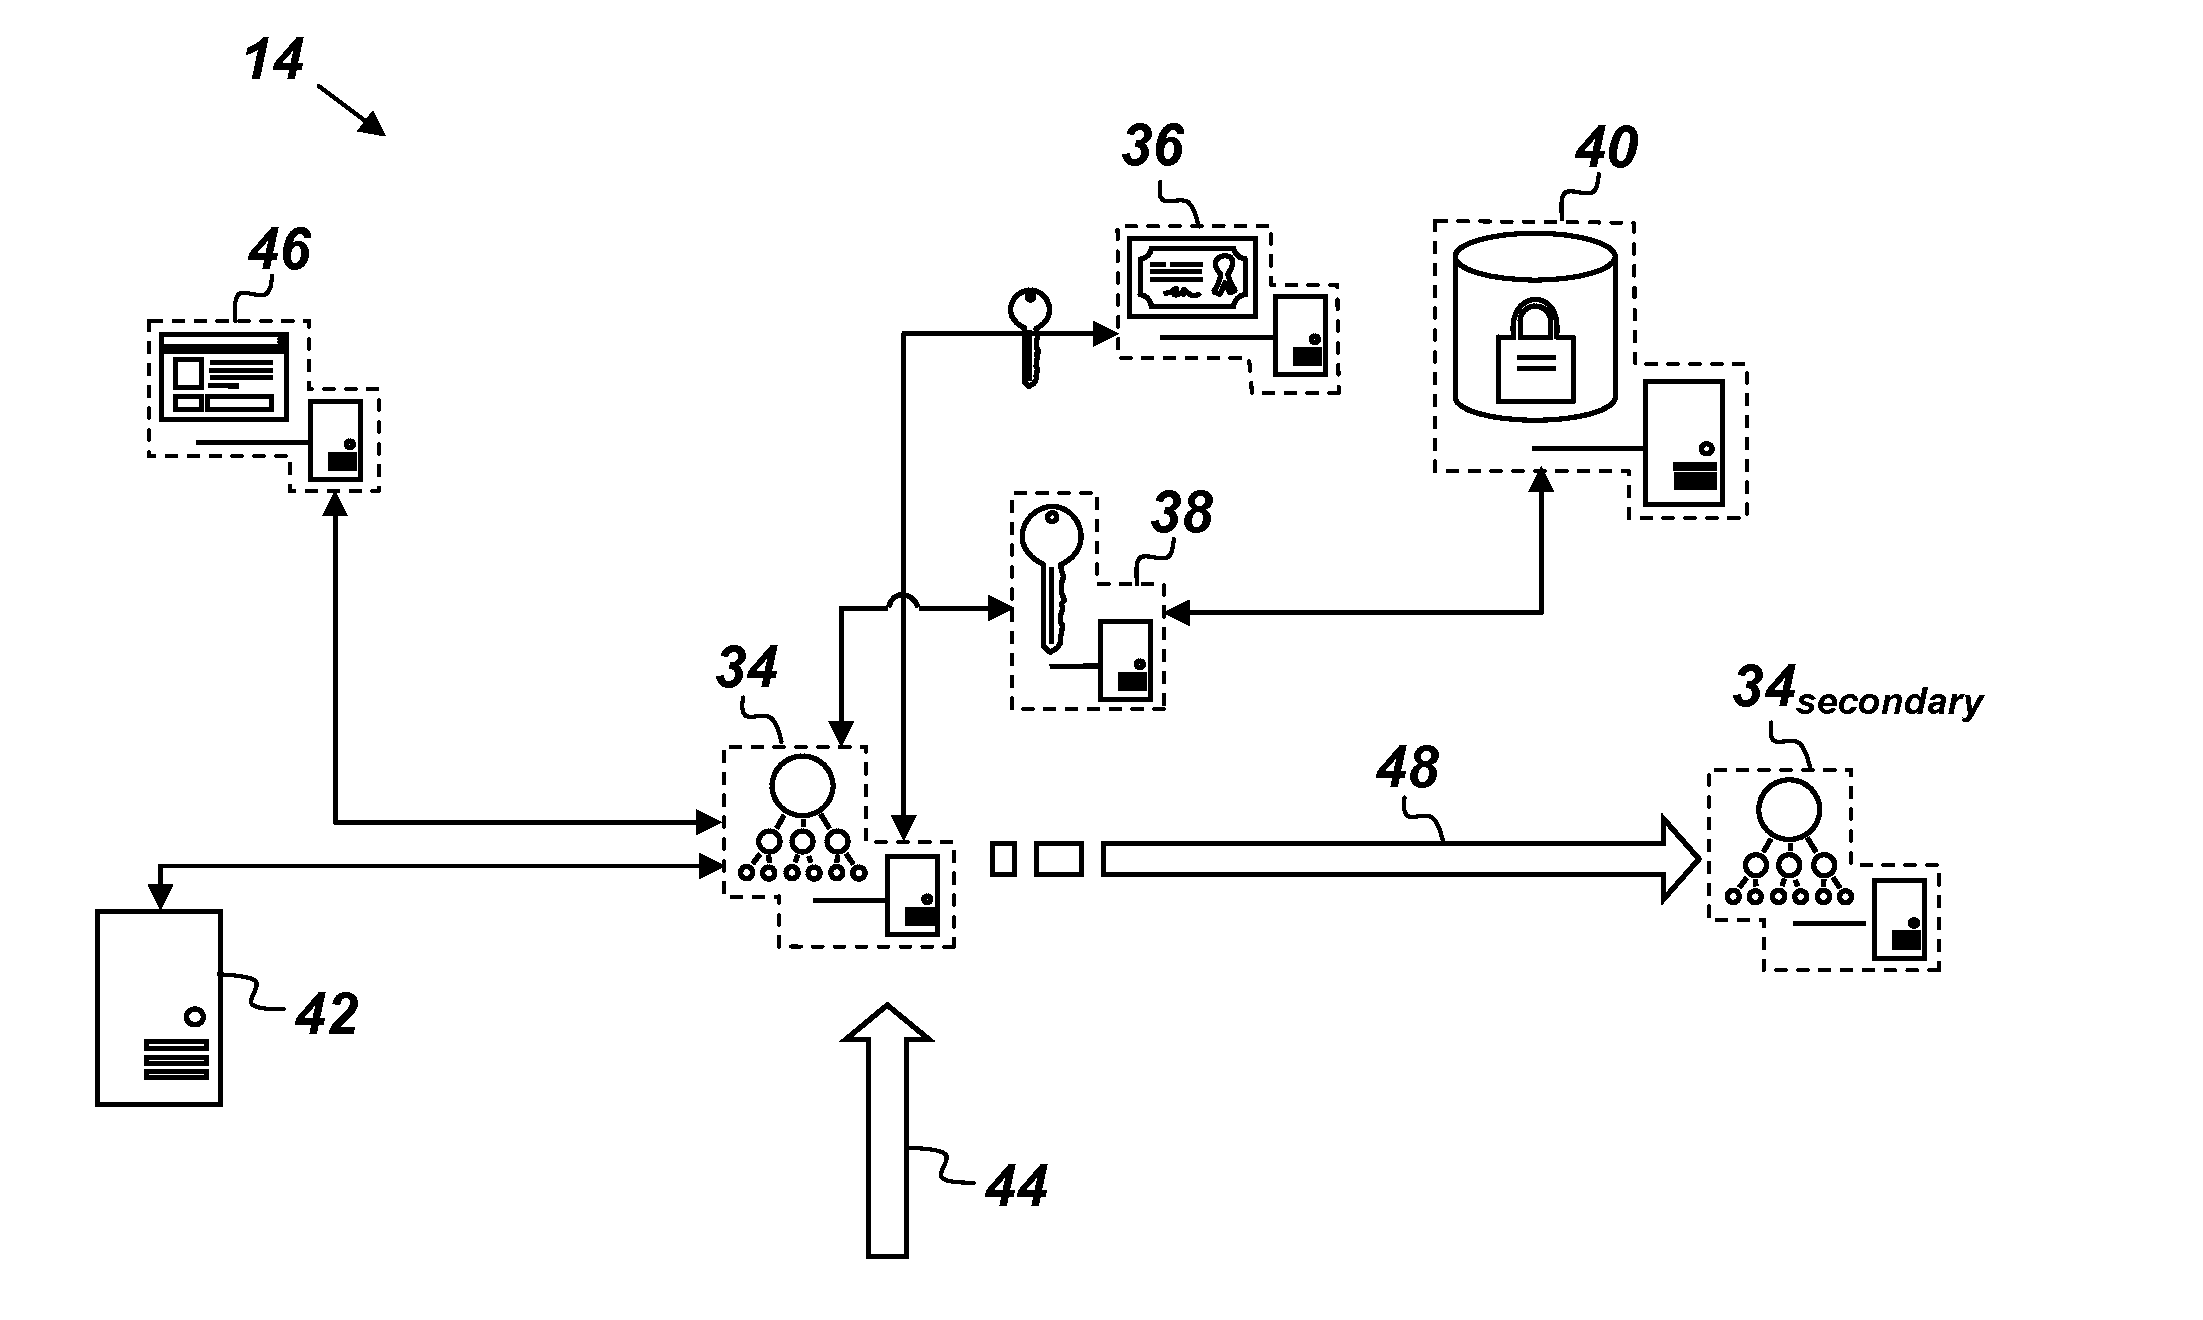 System and Method for High-Assurance Data Storage and Processing based on Homomorphic Encryption